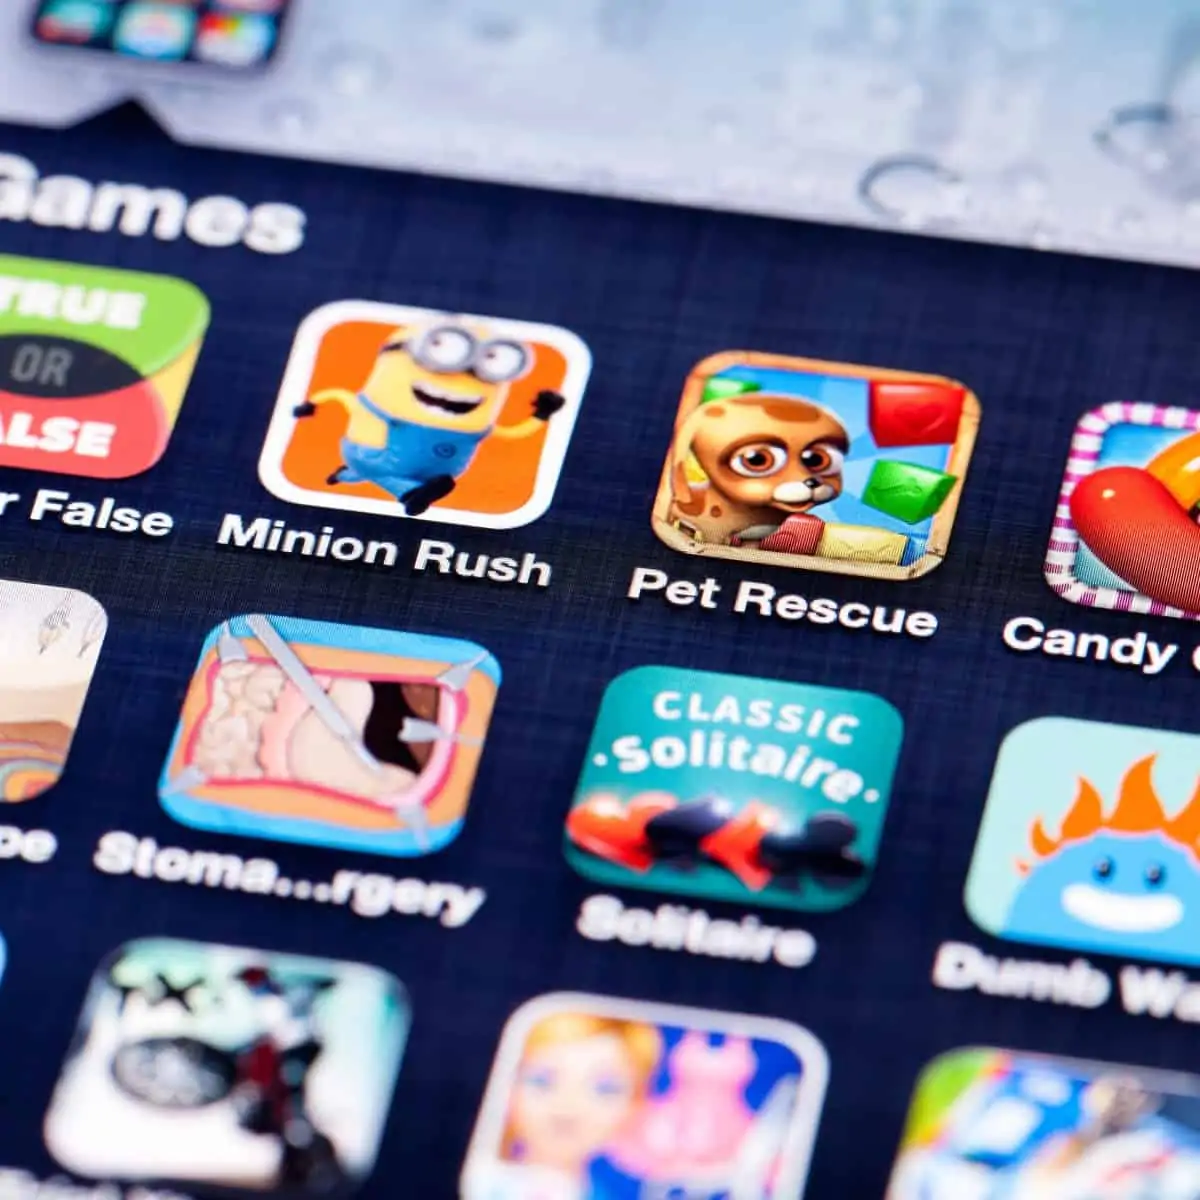 Game apps to win real money